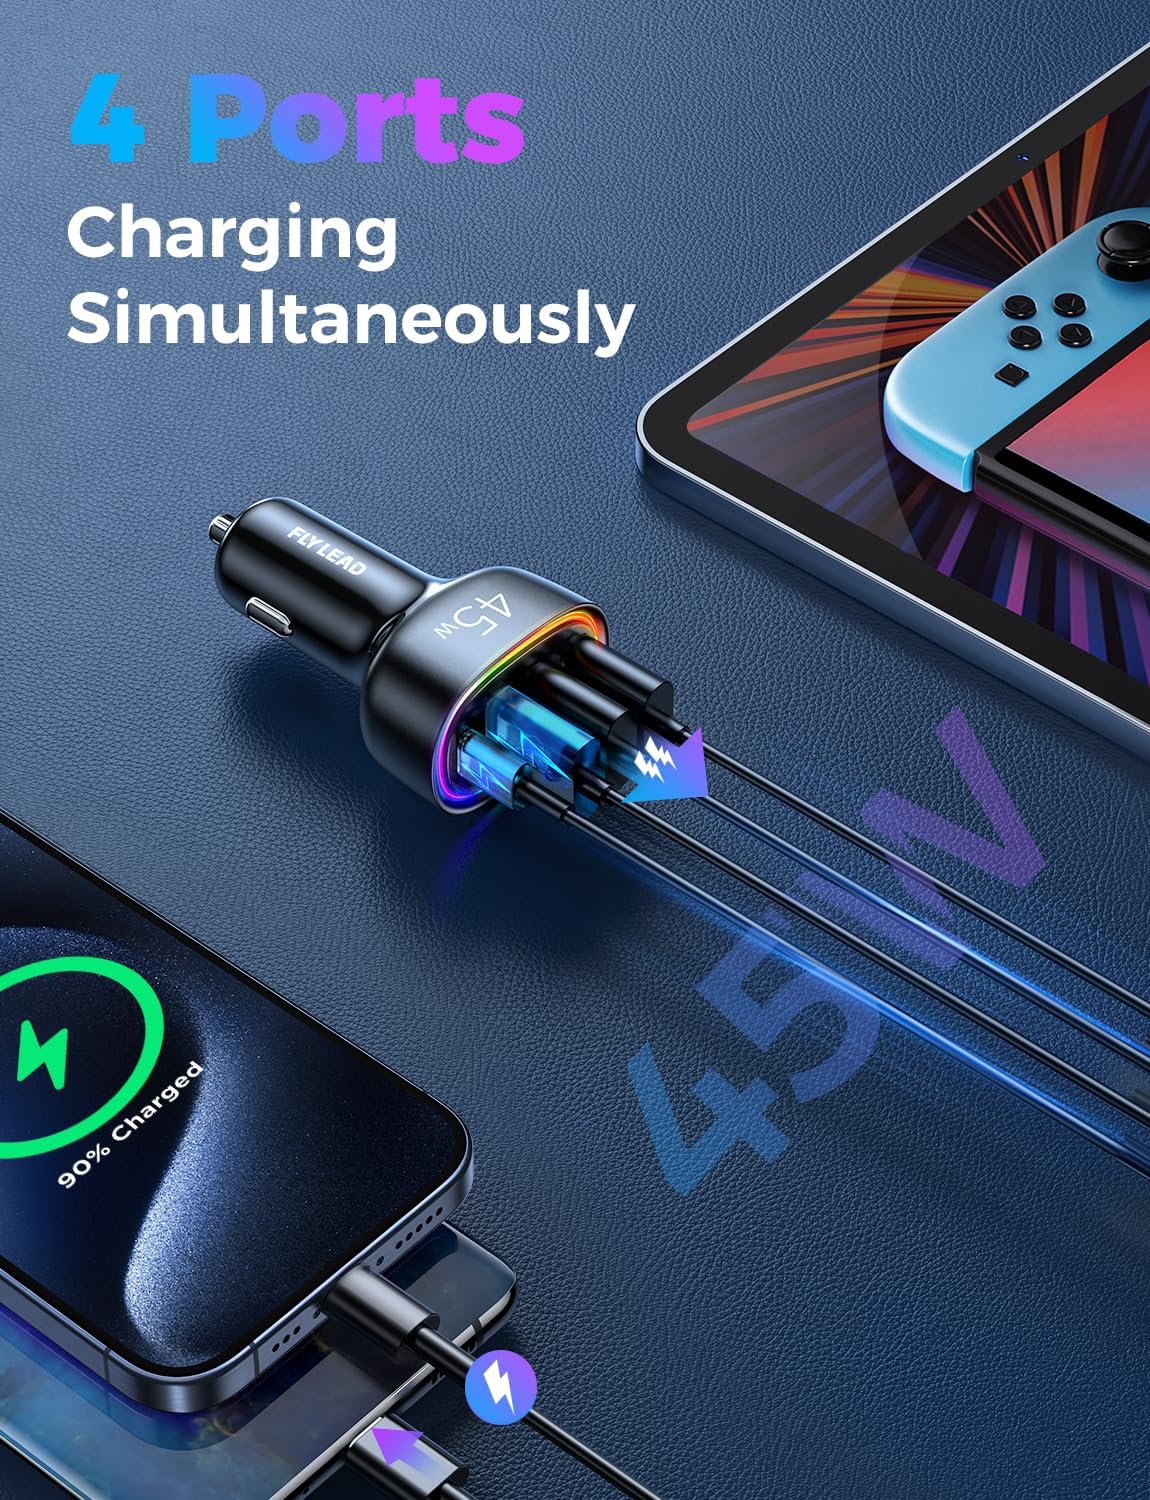 Weighing USB C Car Charger, 45W 4 Ports Super Fast Car Charger Adapter, PD3.0 & QC3.0 30W Type C Car Charger